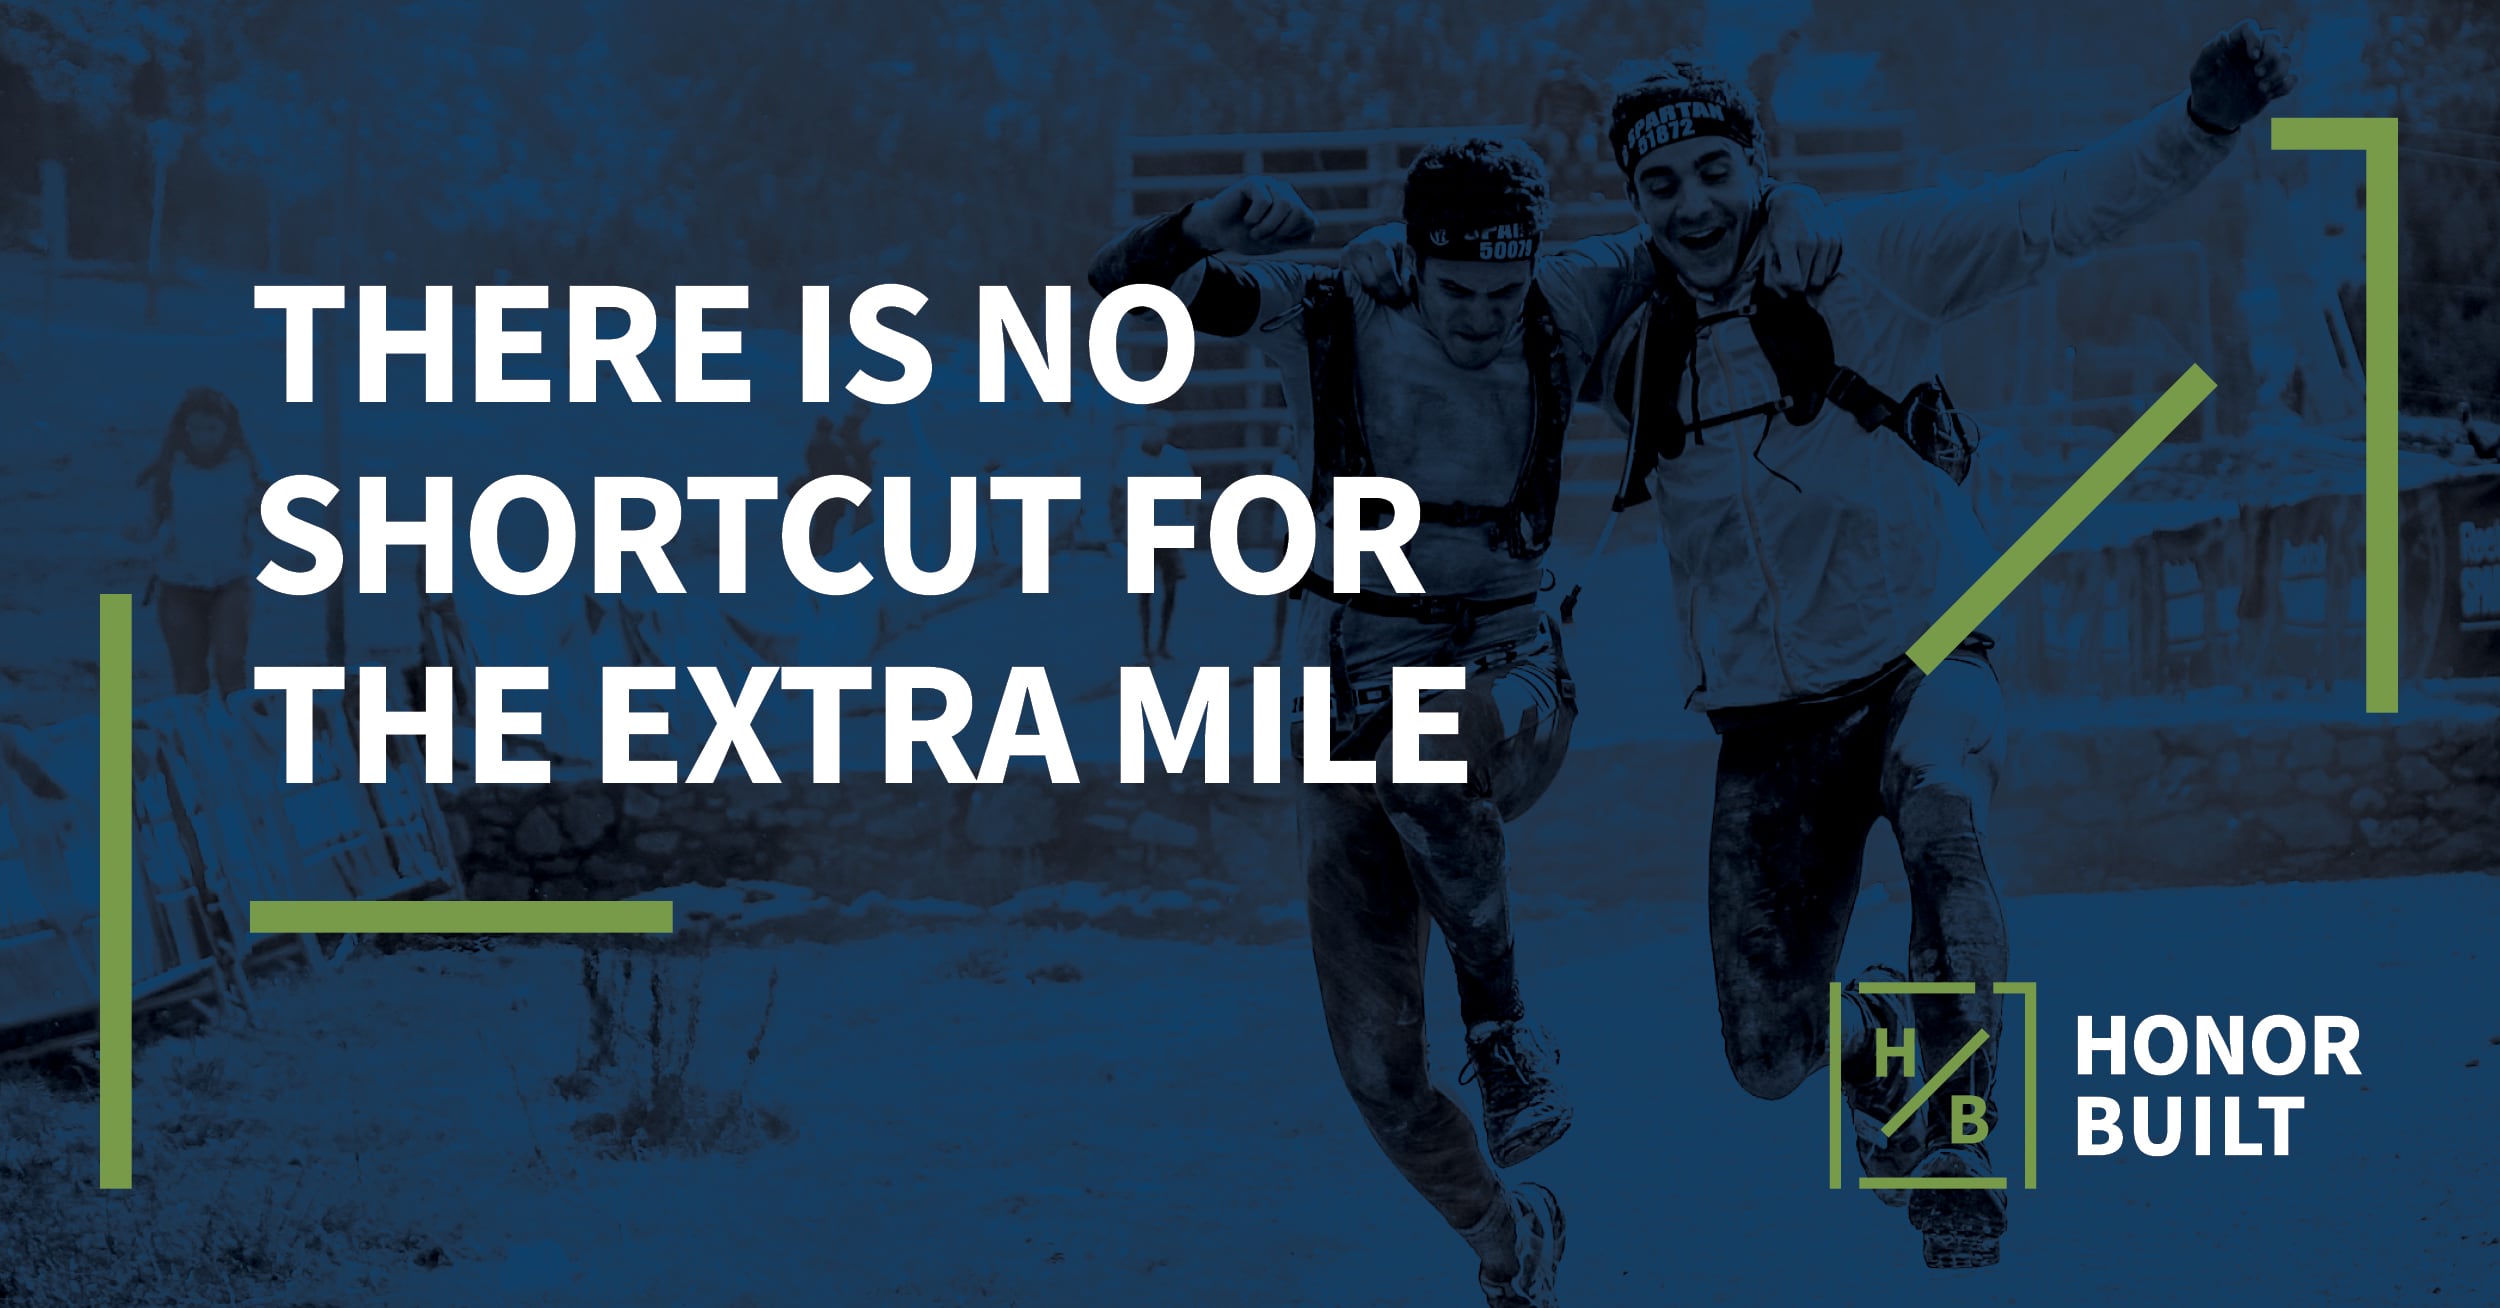 HONORISM #3: There is no shortcut for the extra mile